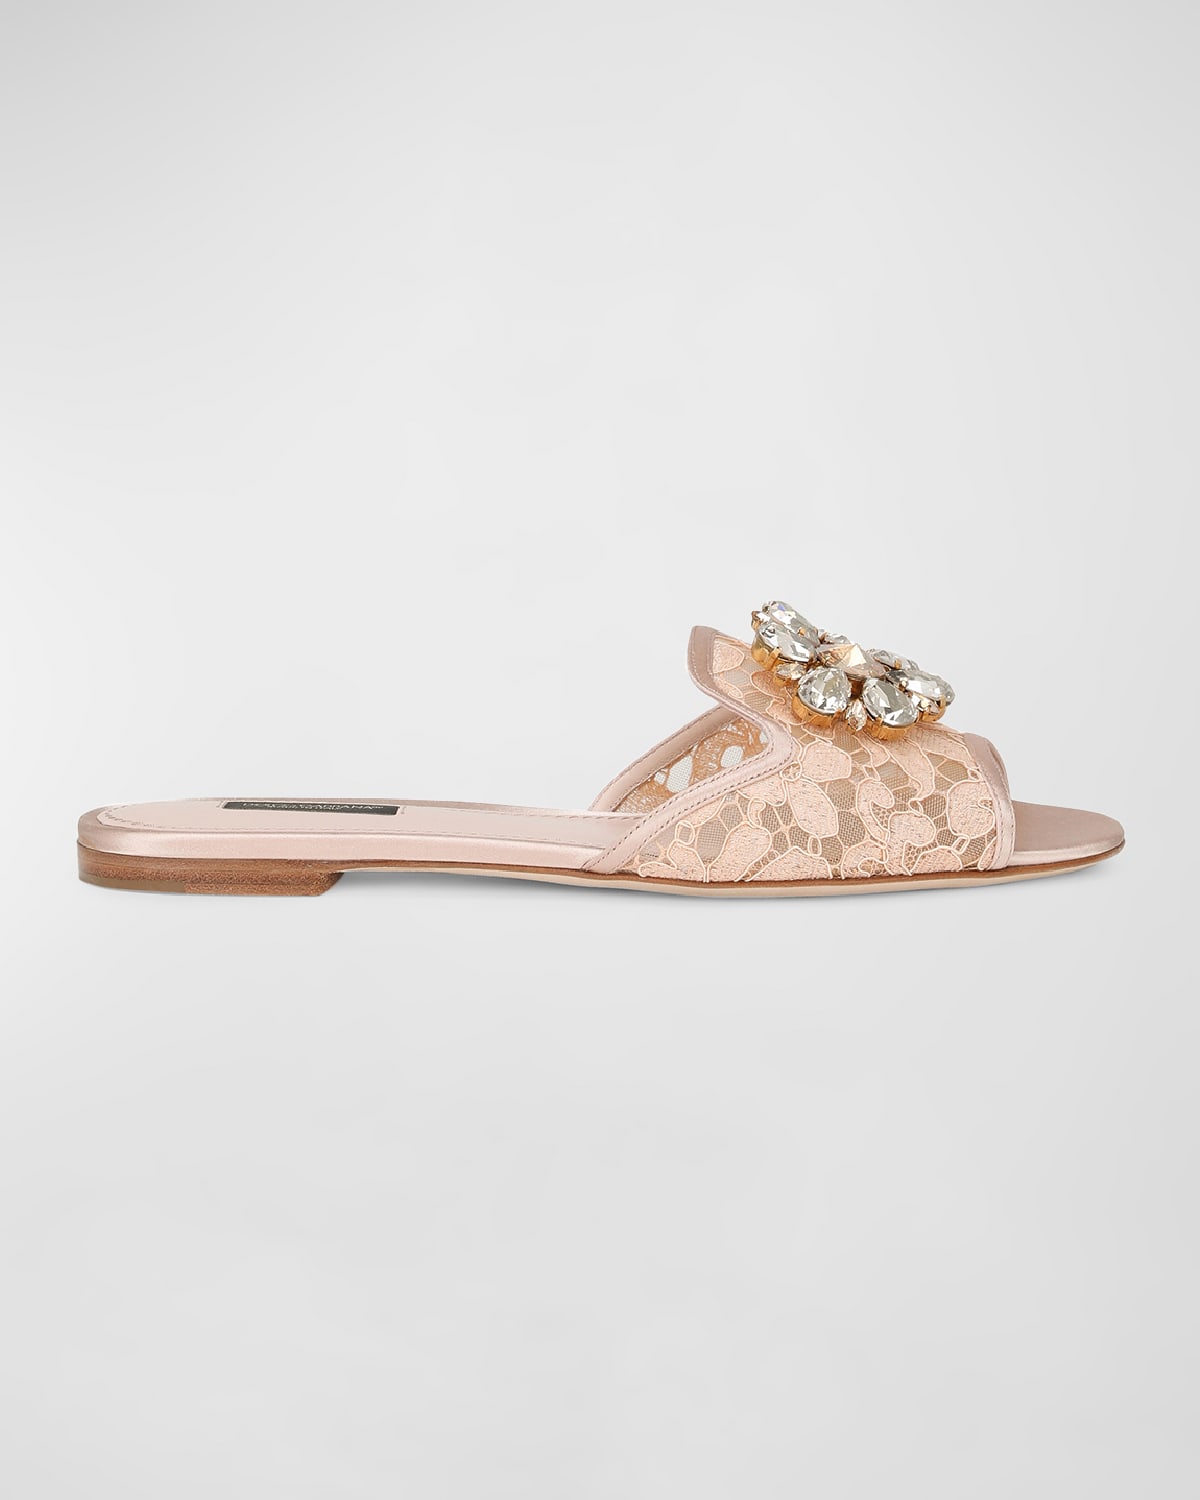 Dolce & Gabbana Lace Crystal Ornament Slide Sandals In Gold